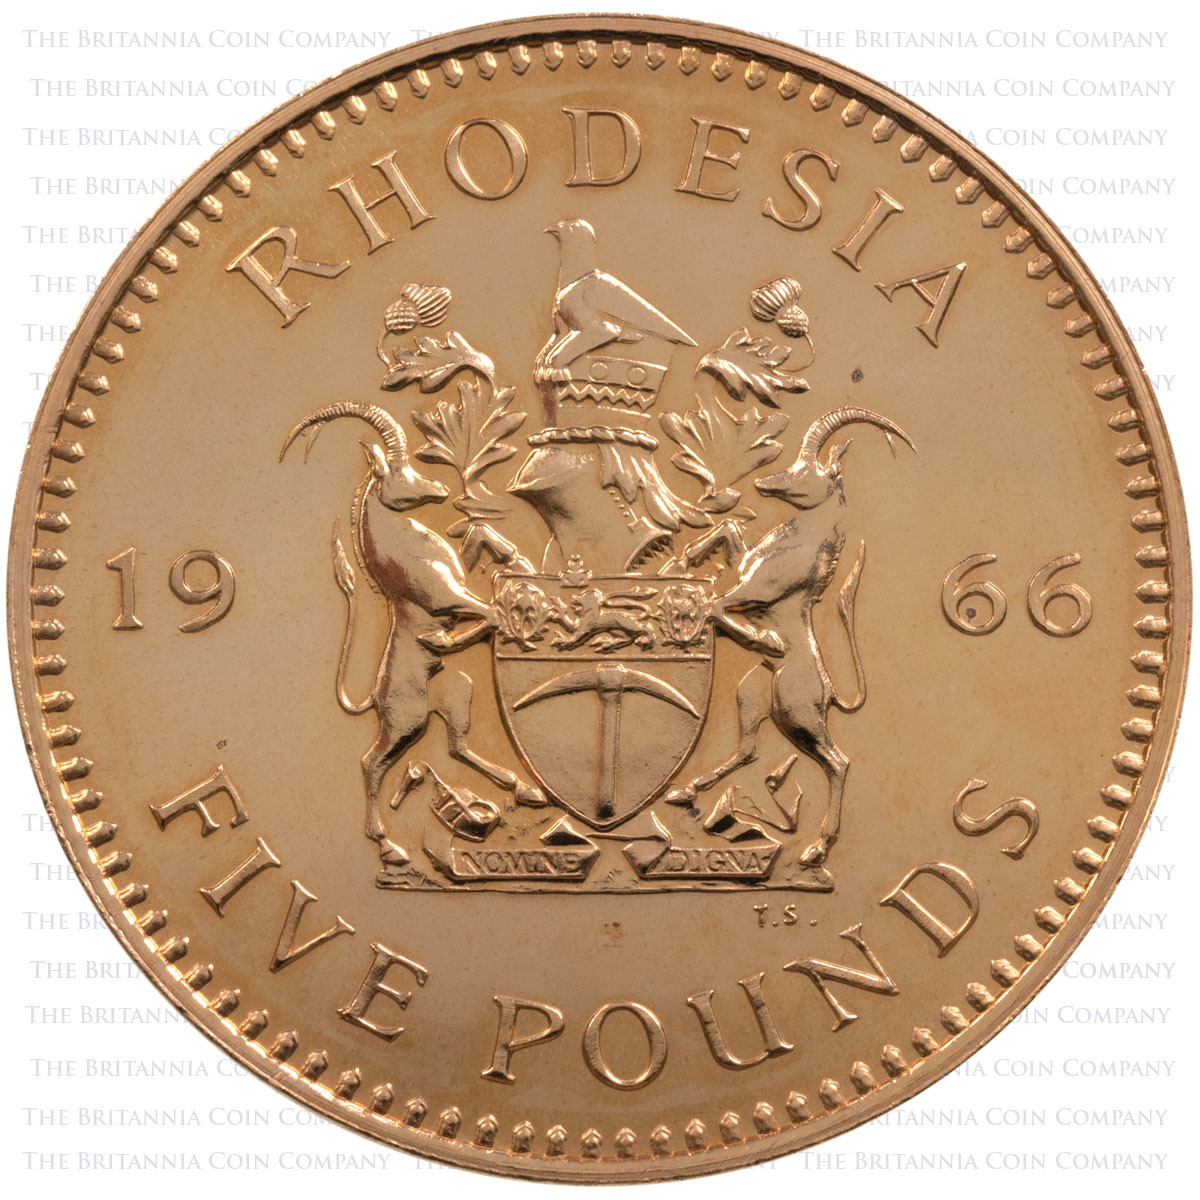 1966 Rhodesia Five Pound Gold Proof Coin Reverse